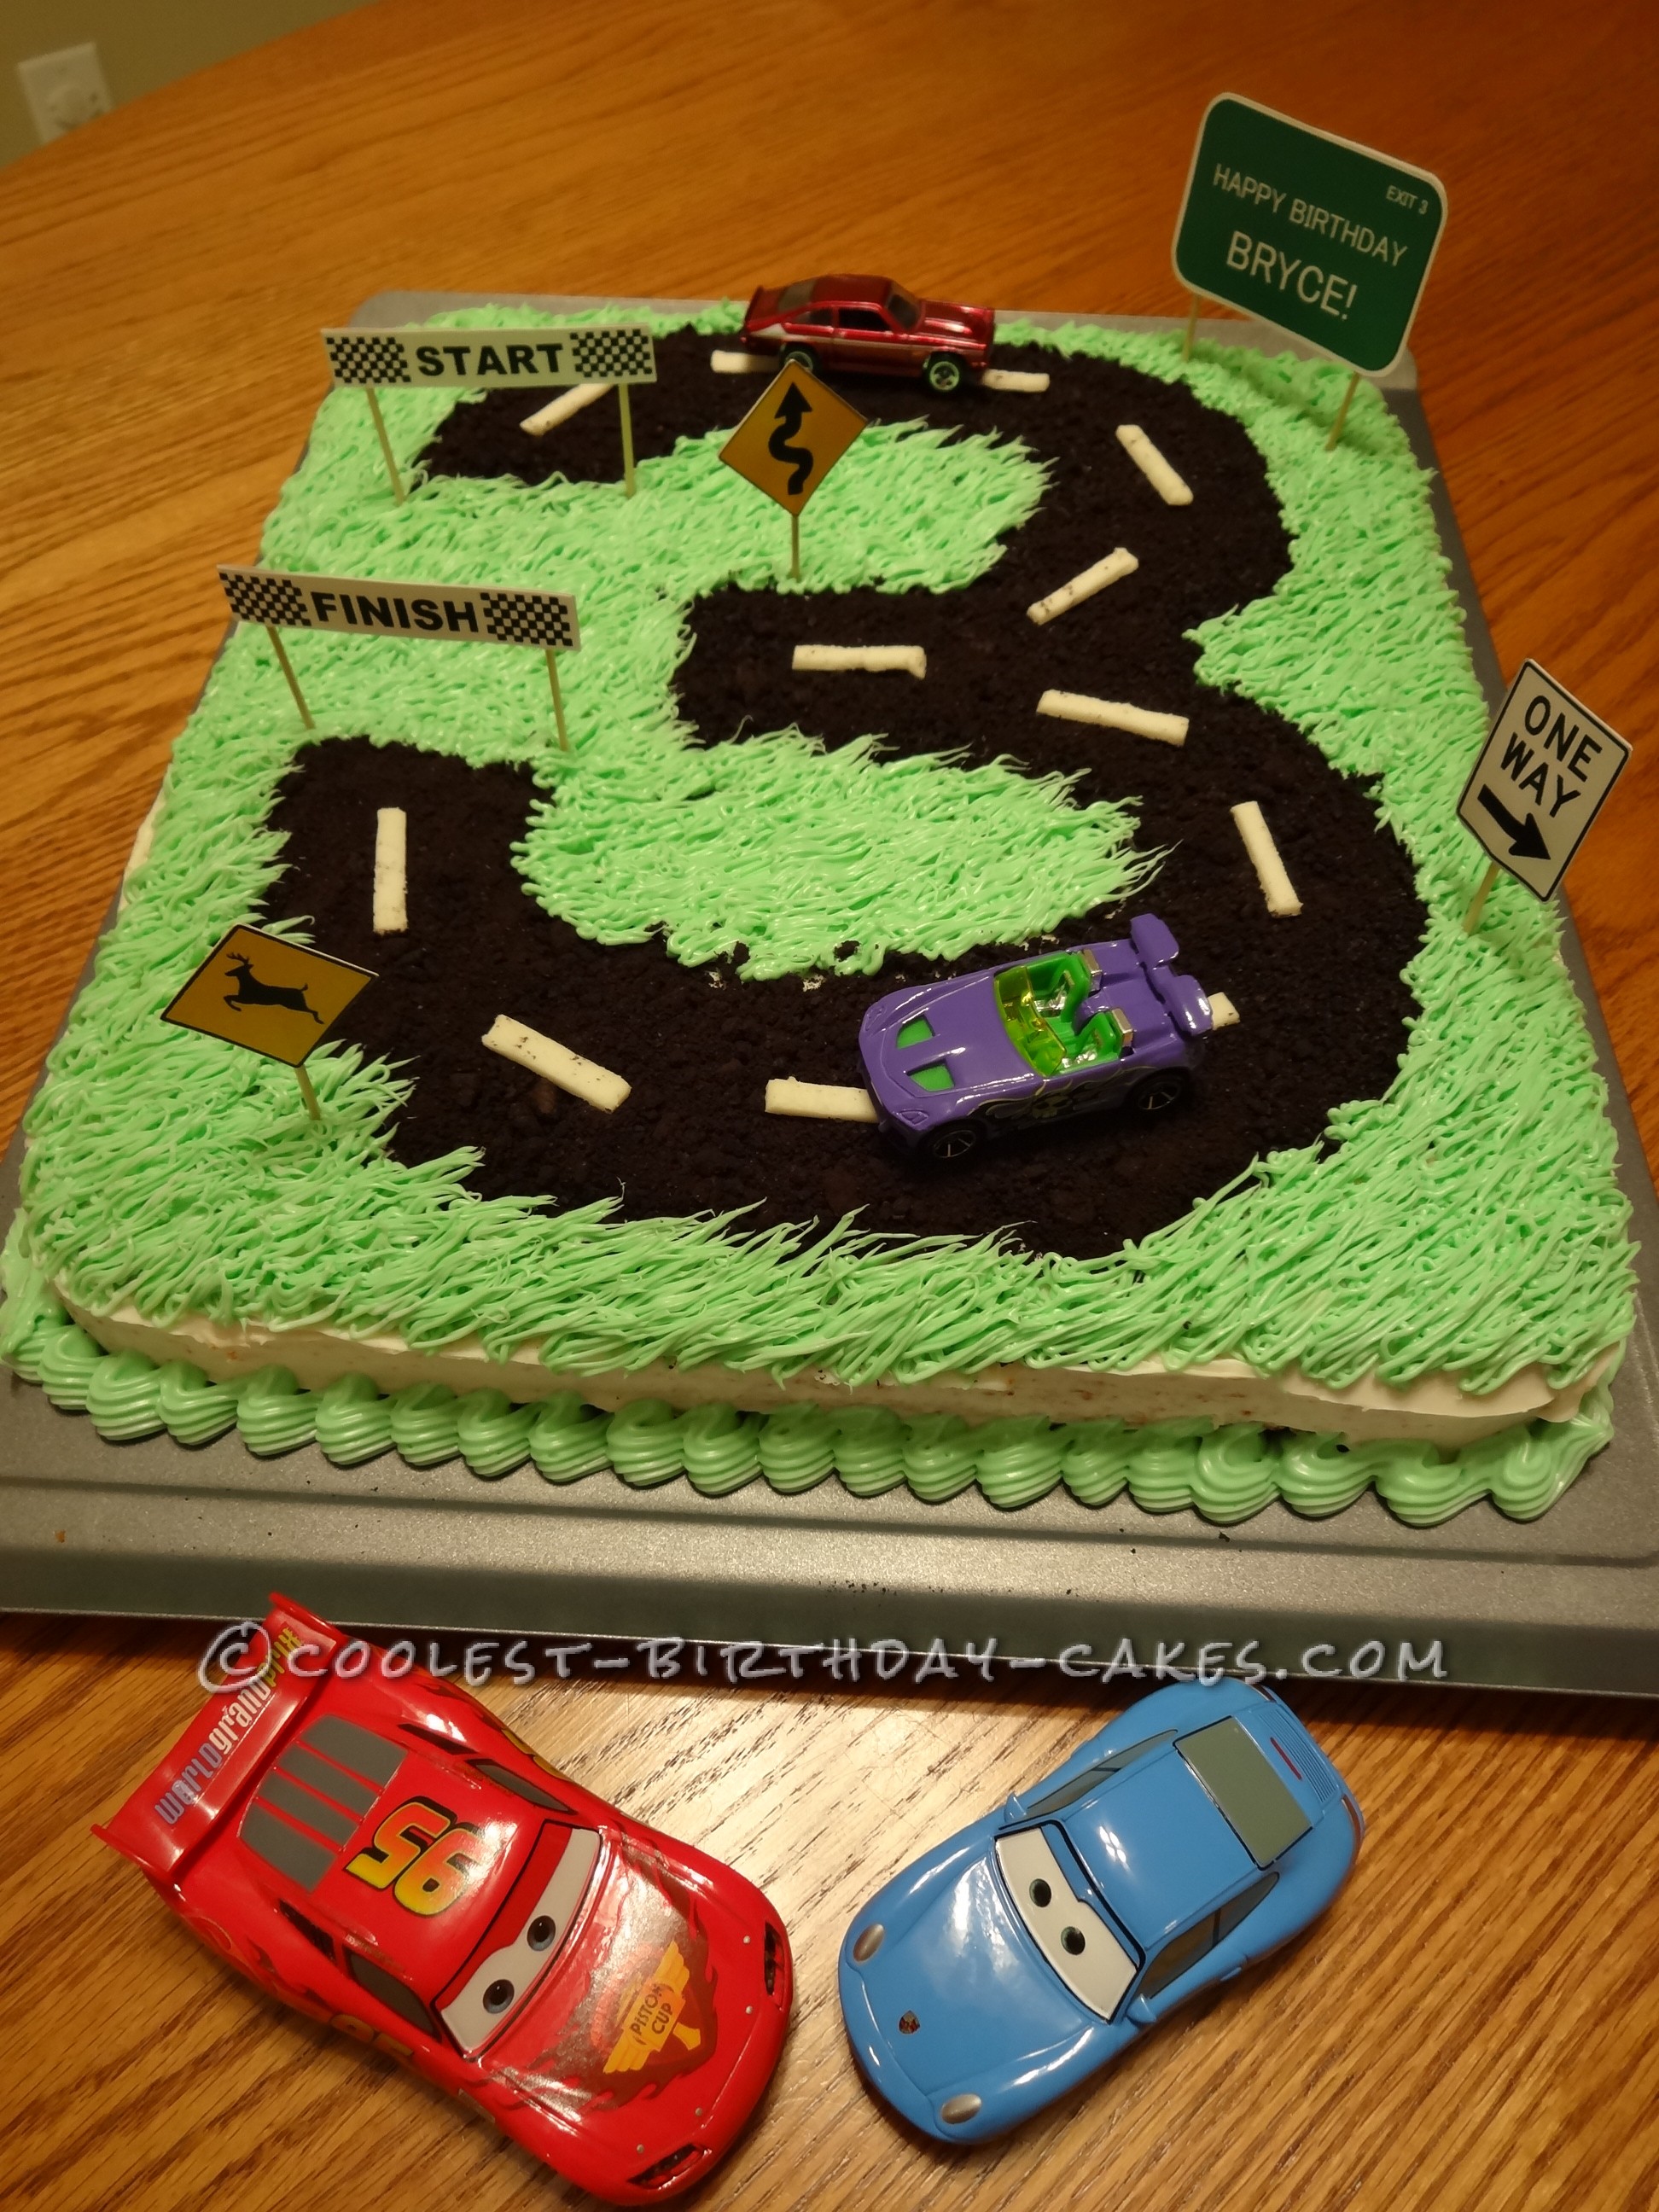 Bryce's Cake with a Road